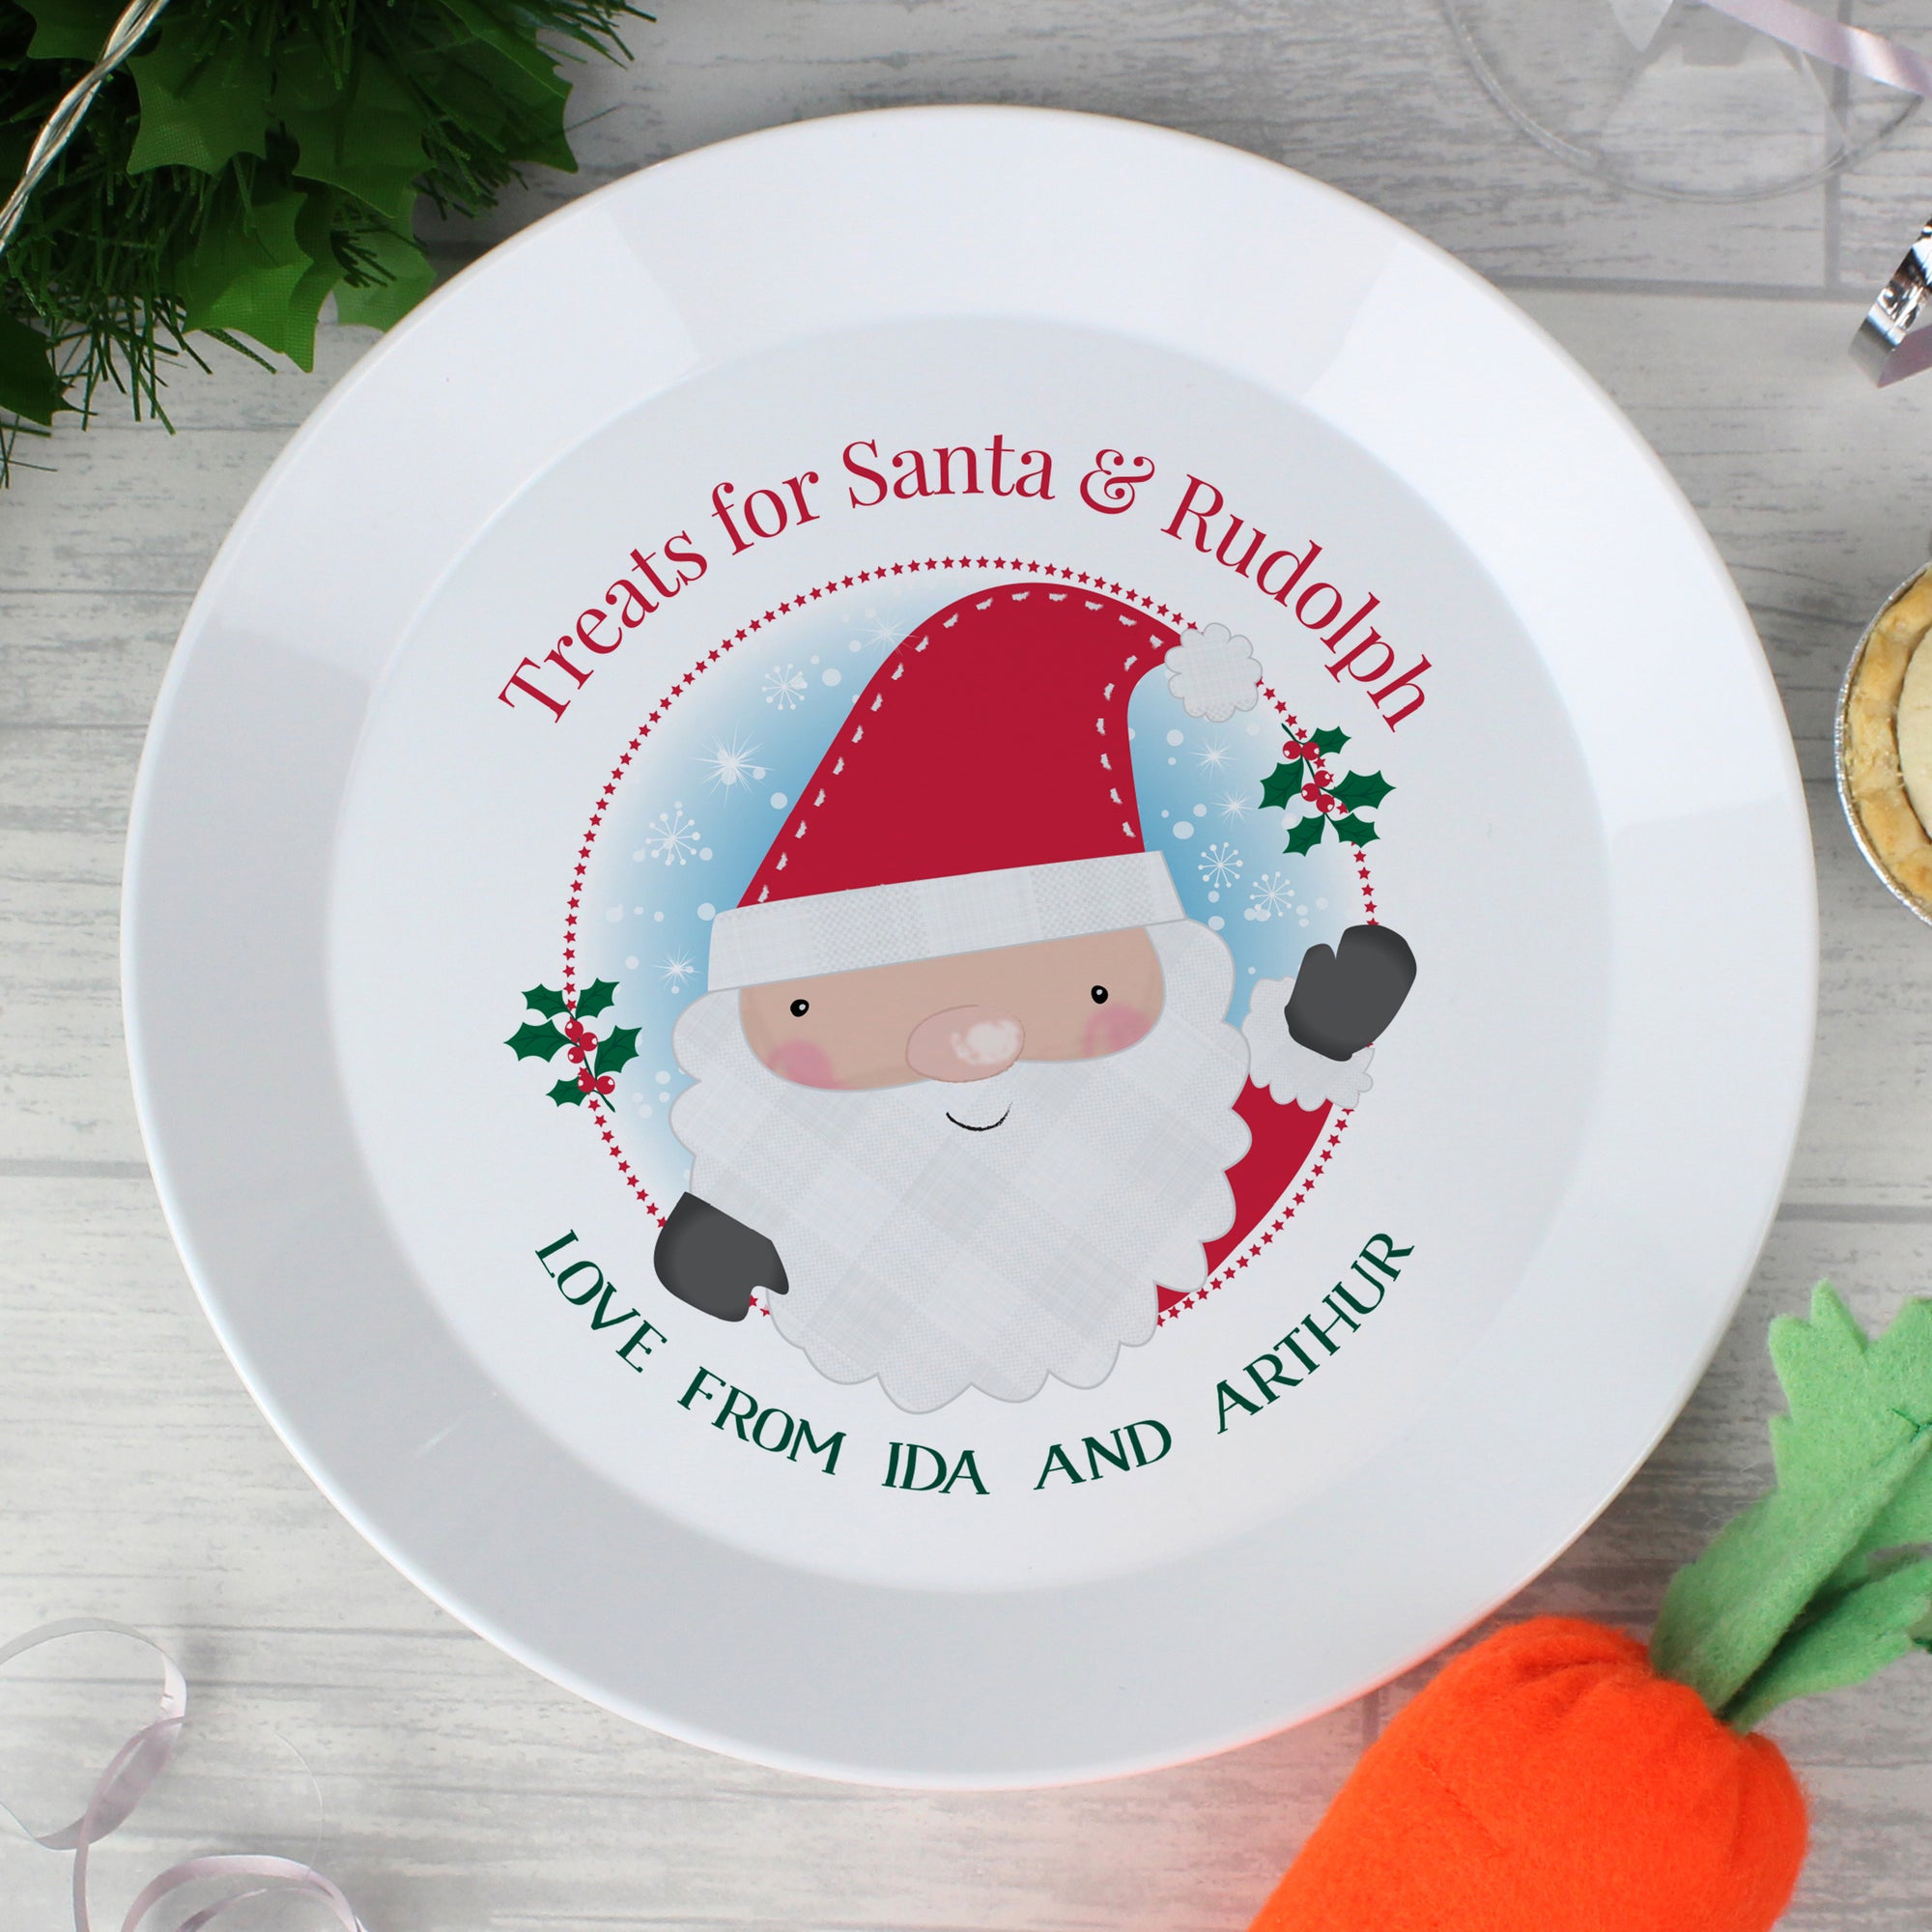 Personalised Christmas Eve plate featuring a large image of Father Christmas in the centre, which can be personalised with your own text of up to 25 characters. Made from shatter-proof white plastic. preparations for Father Christmas's visit!  Featuring a large image of Father Christmas in the centre of the plate, there is space underneath the image for your own personalisation of up to 25 characters.   